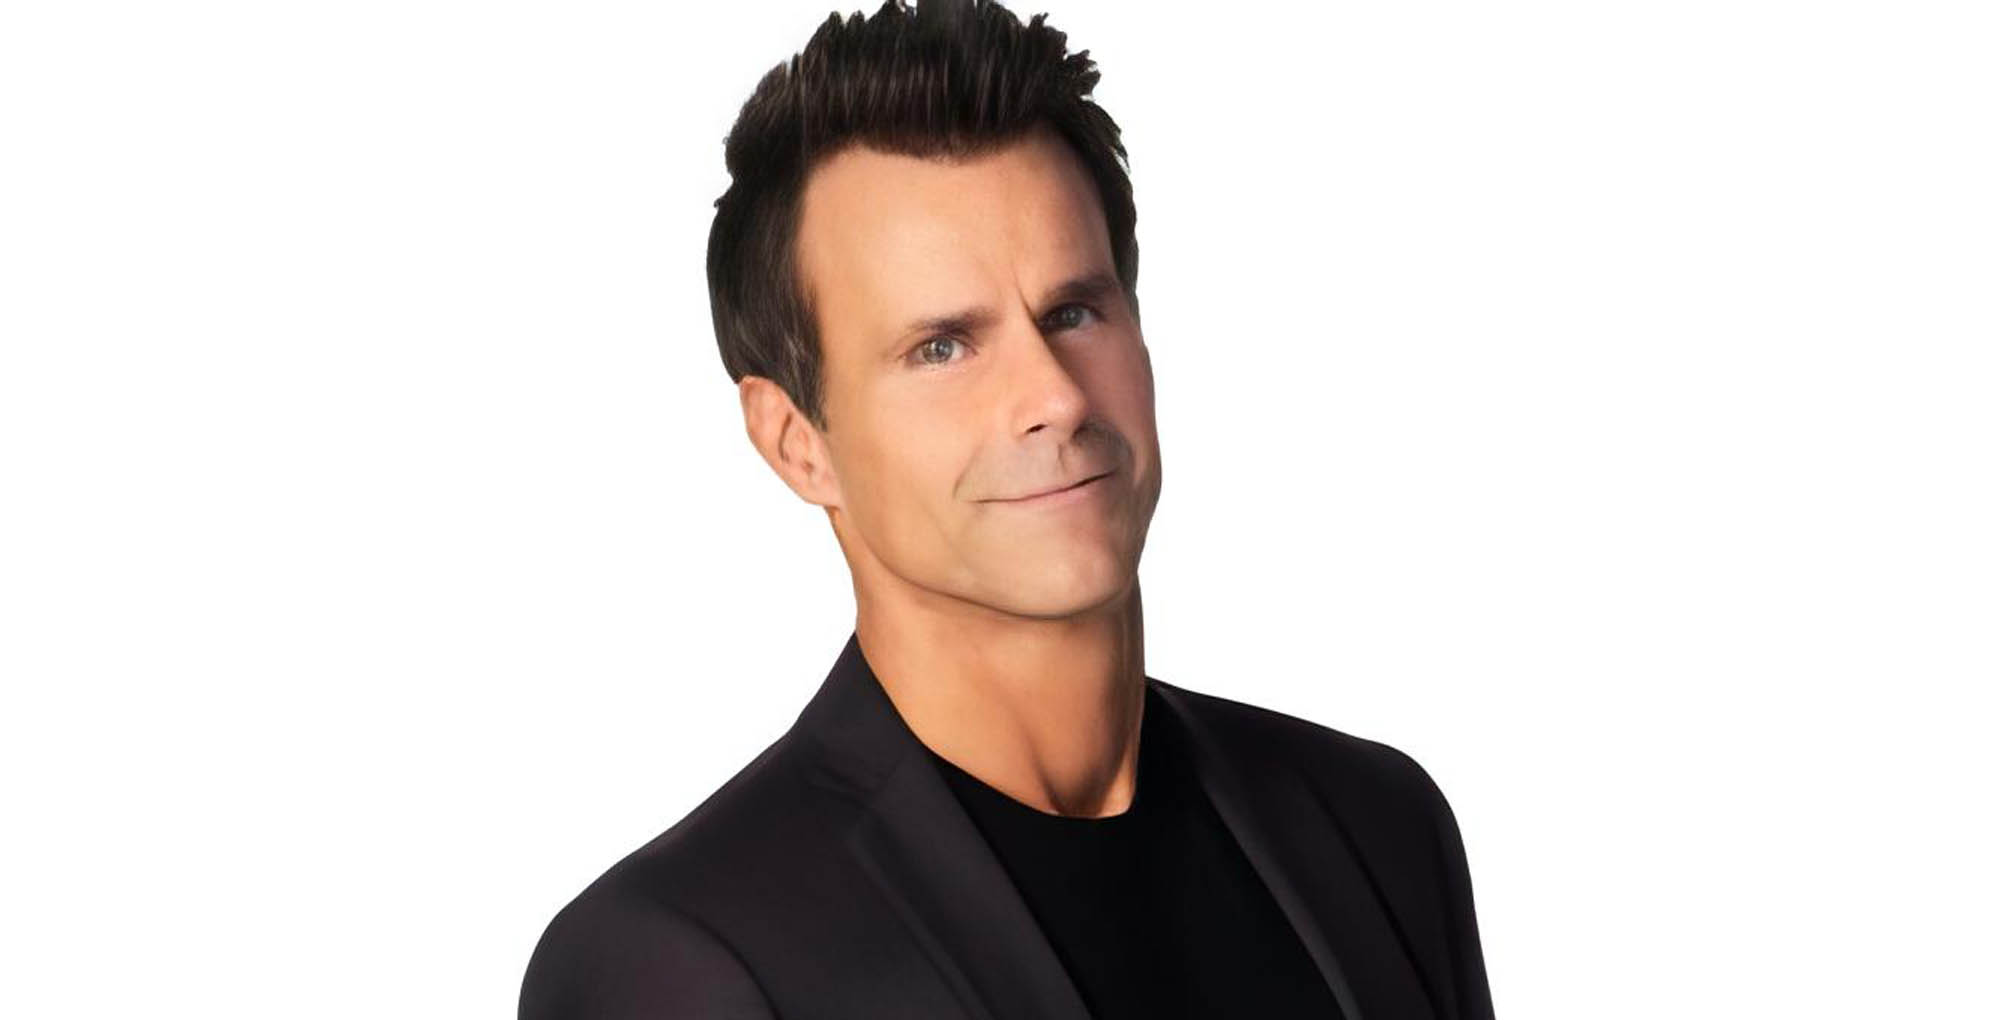 cameron mathison from general hospital wearing a jacket against a white background.